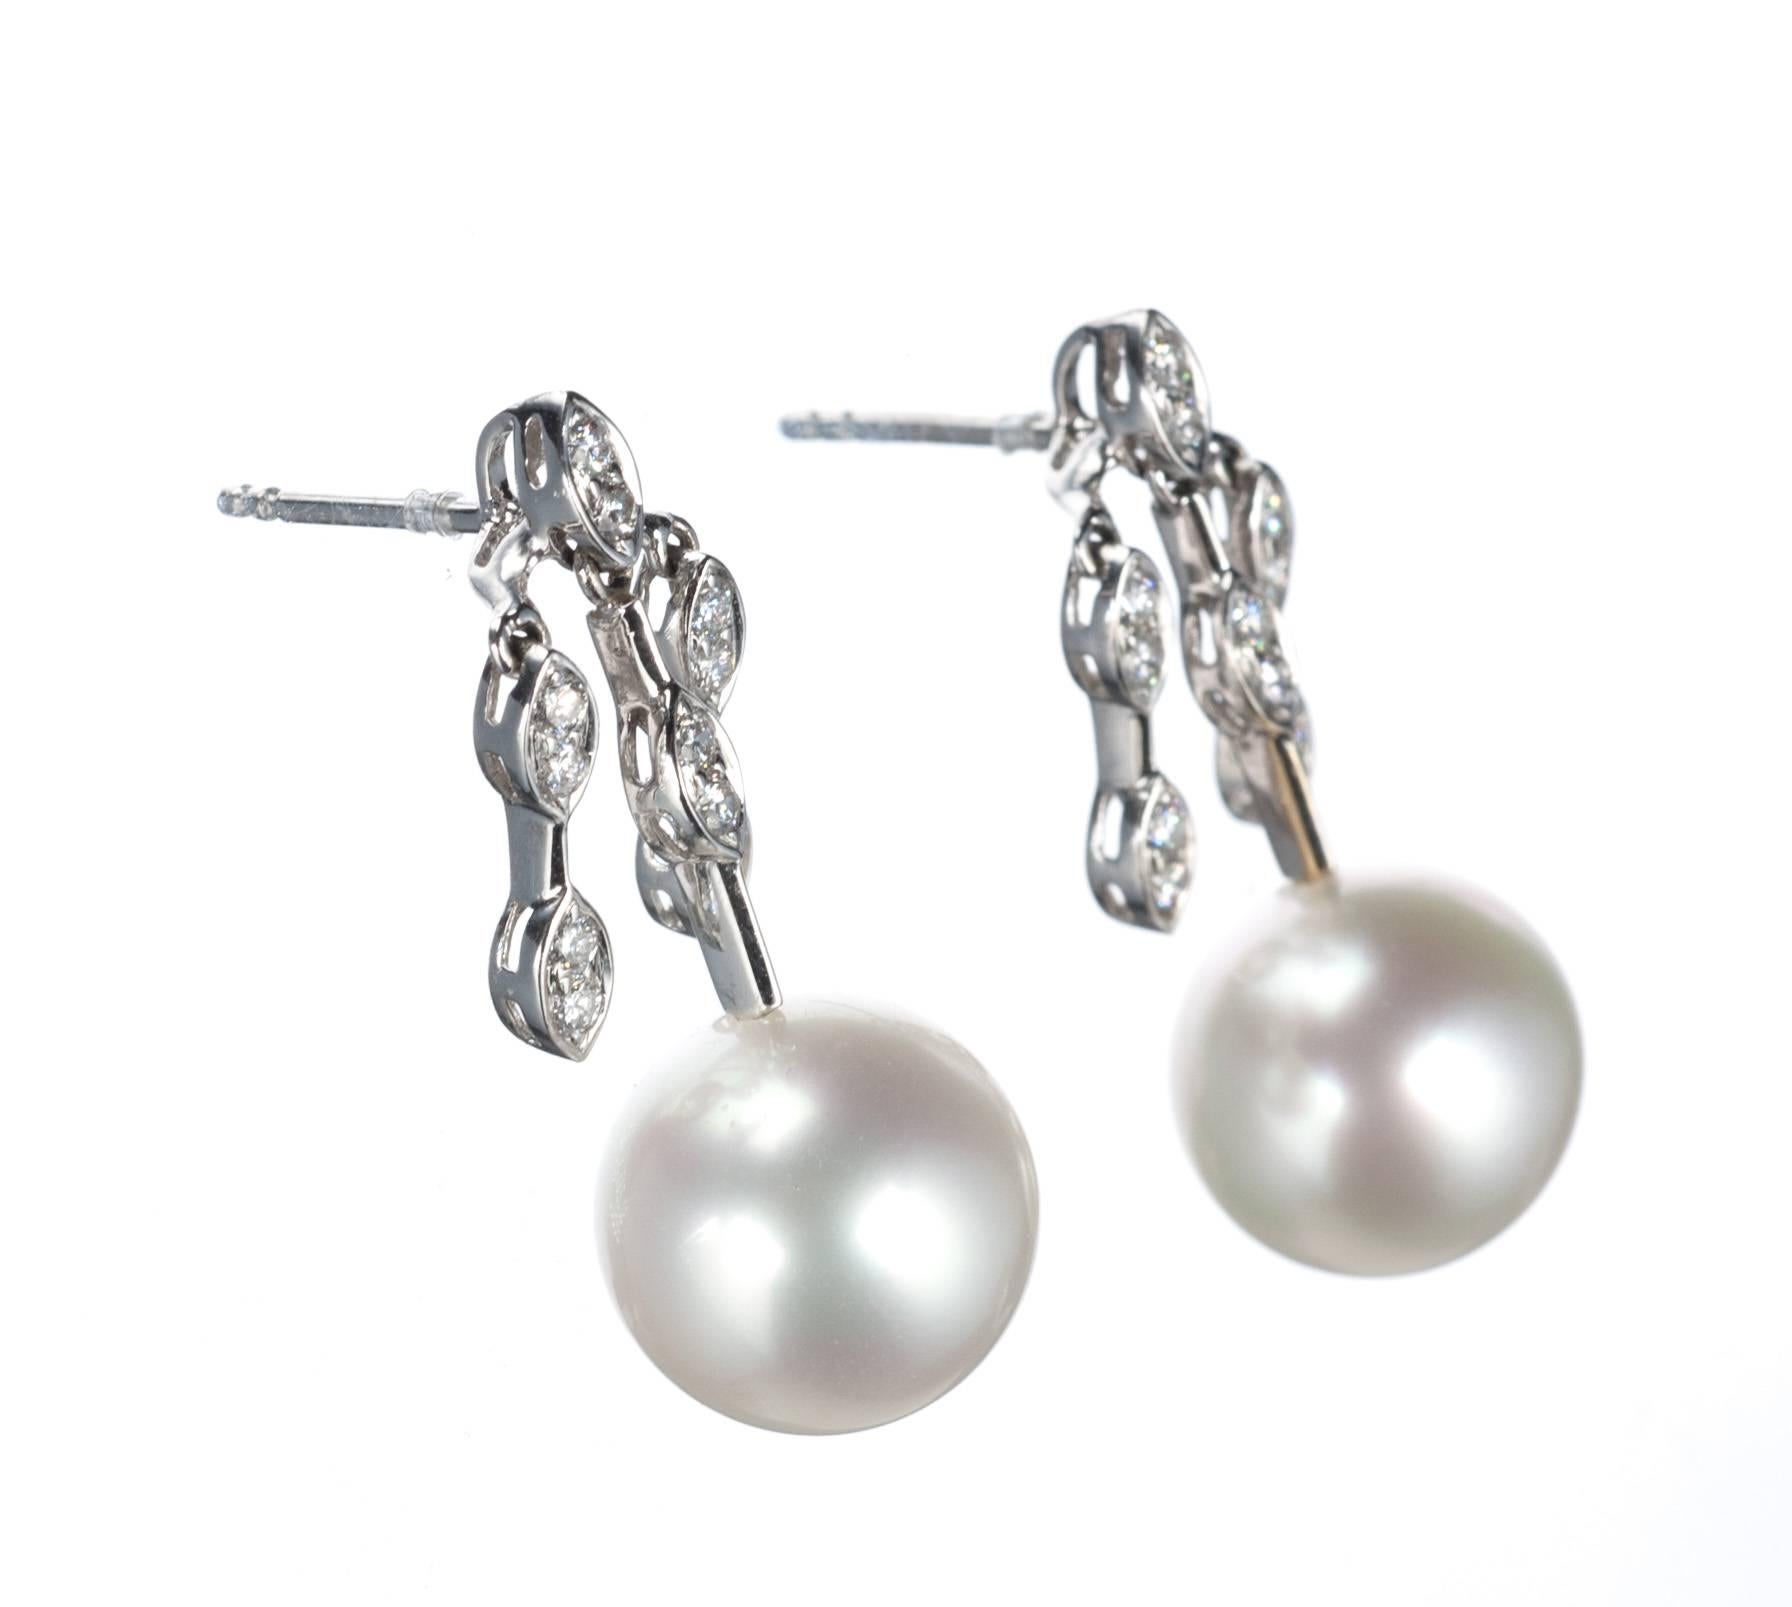 Gently glinting on the ear, a pair of south sea cultured pearl earrings accented with 24 brilliant-cut round diamonds, .43ctw. of G color and VS clarity, set in descending lines of 18-karat white gold. Secured on posts with friction backs. Measure